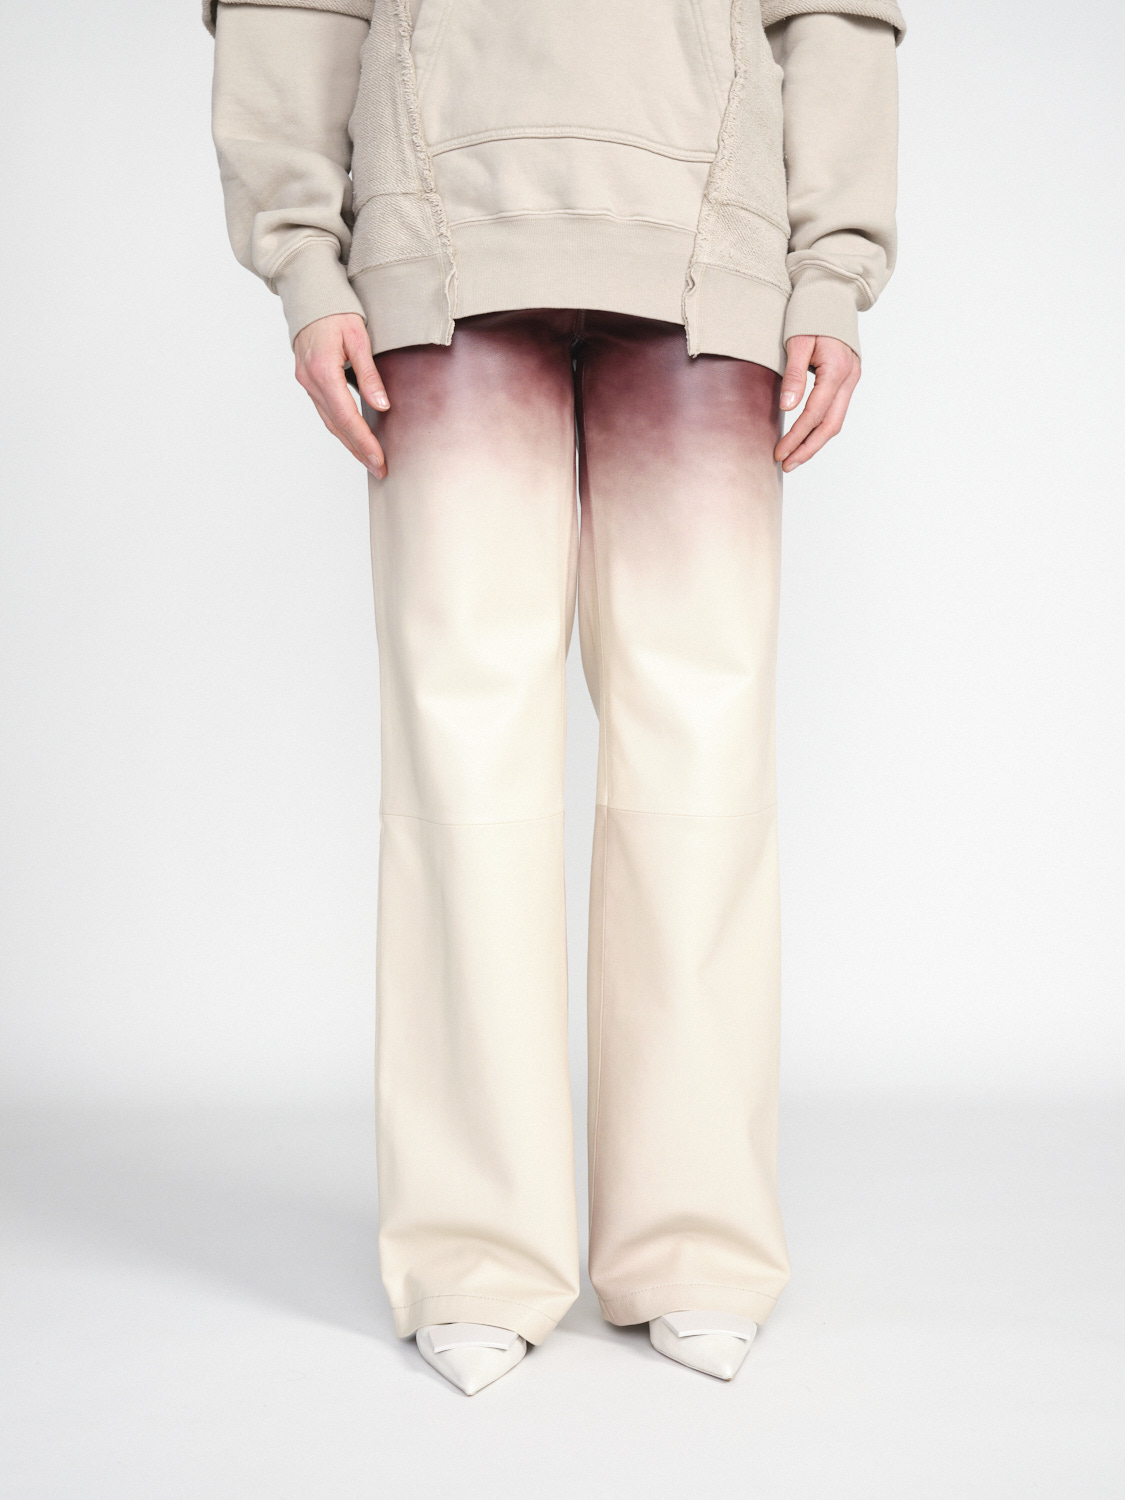 Arma Galizia – leather trousers with degradé effect  brown 36